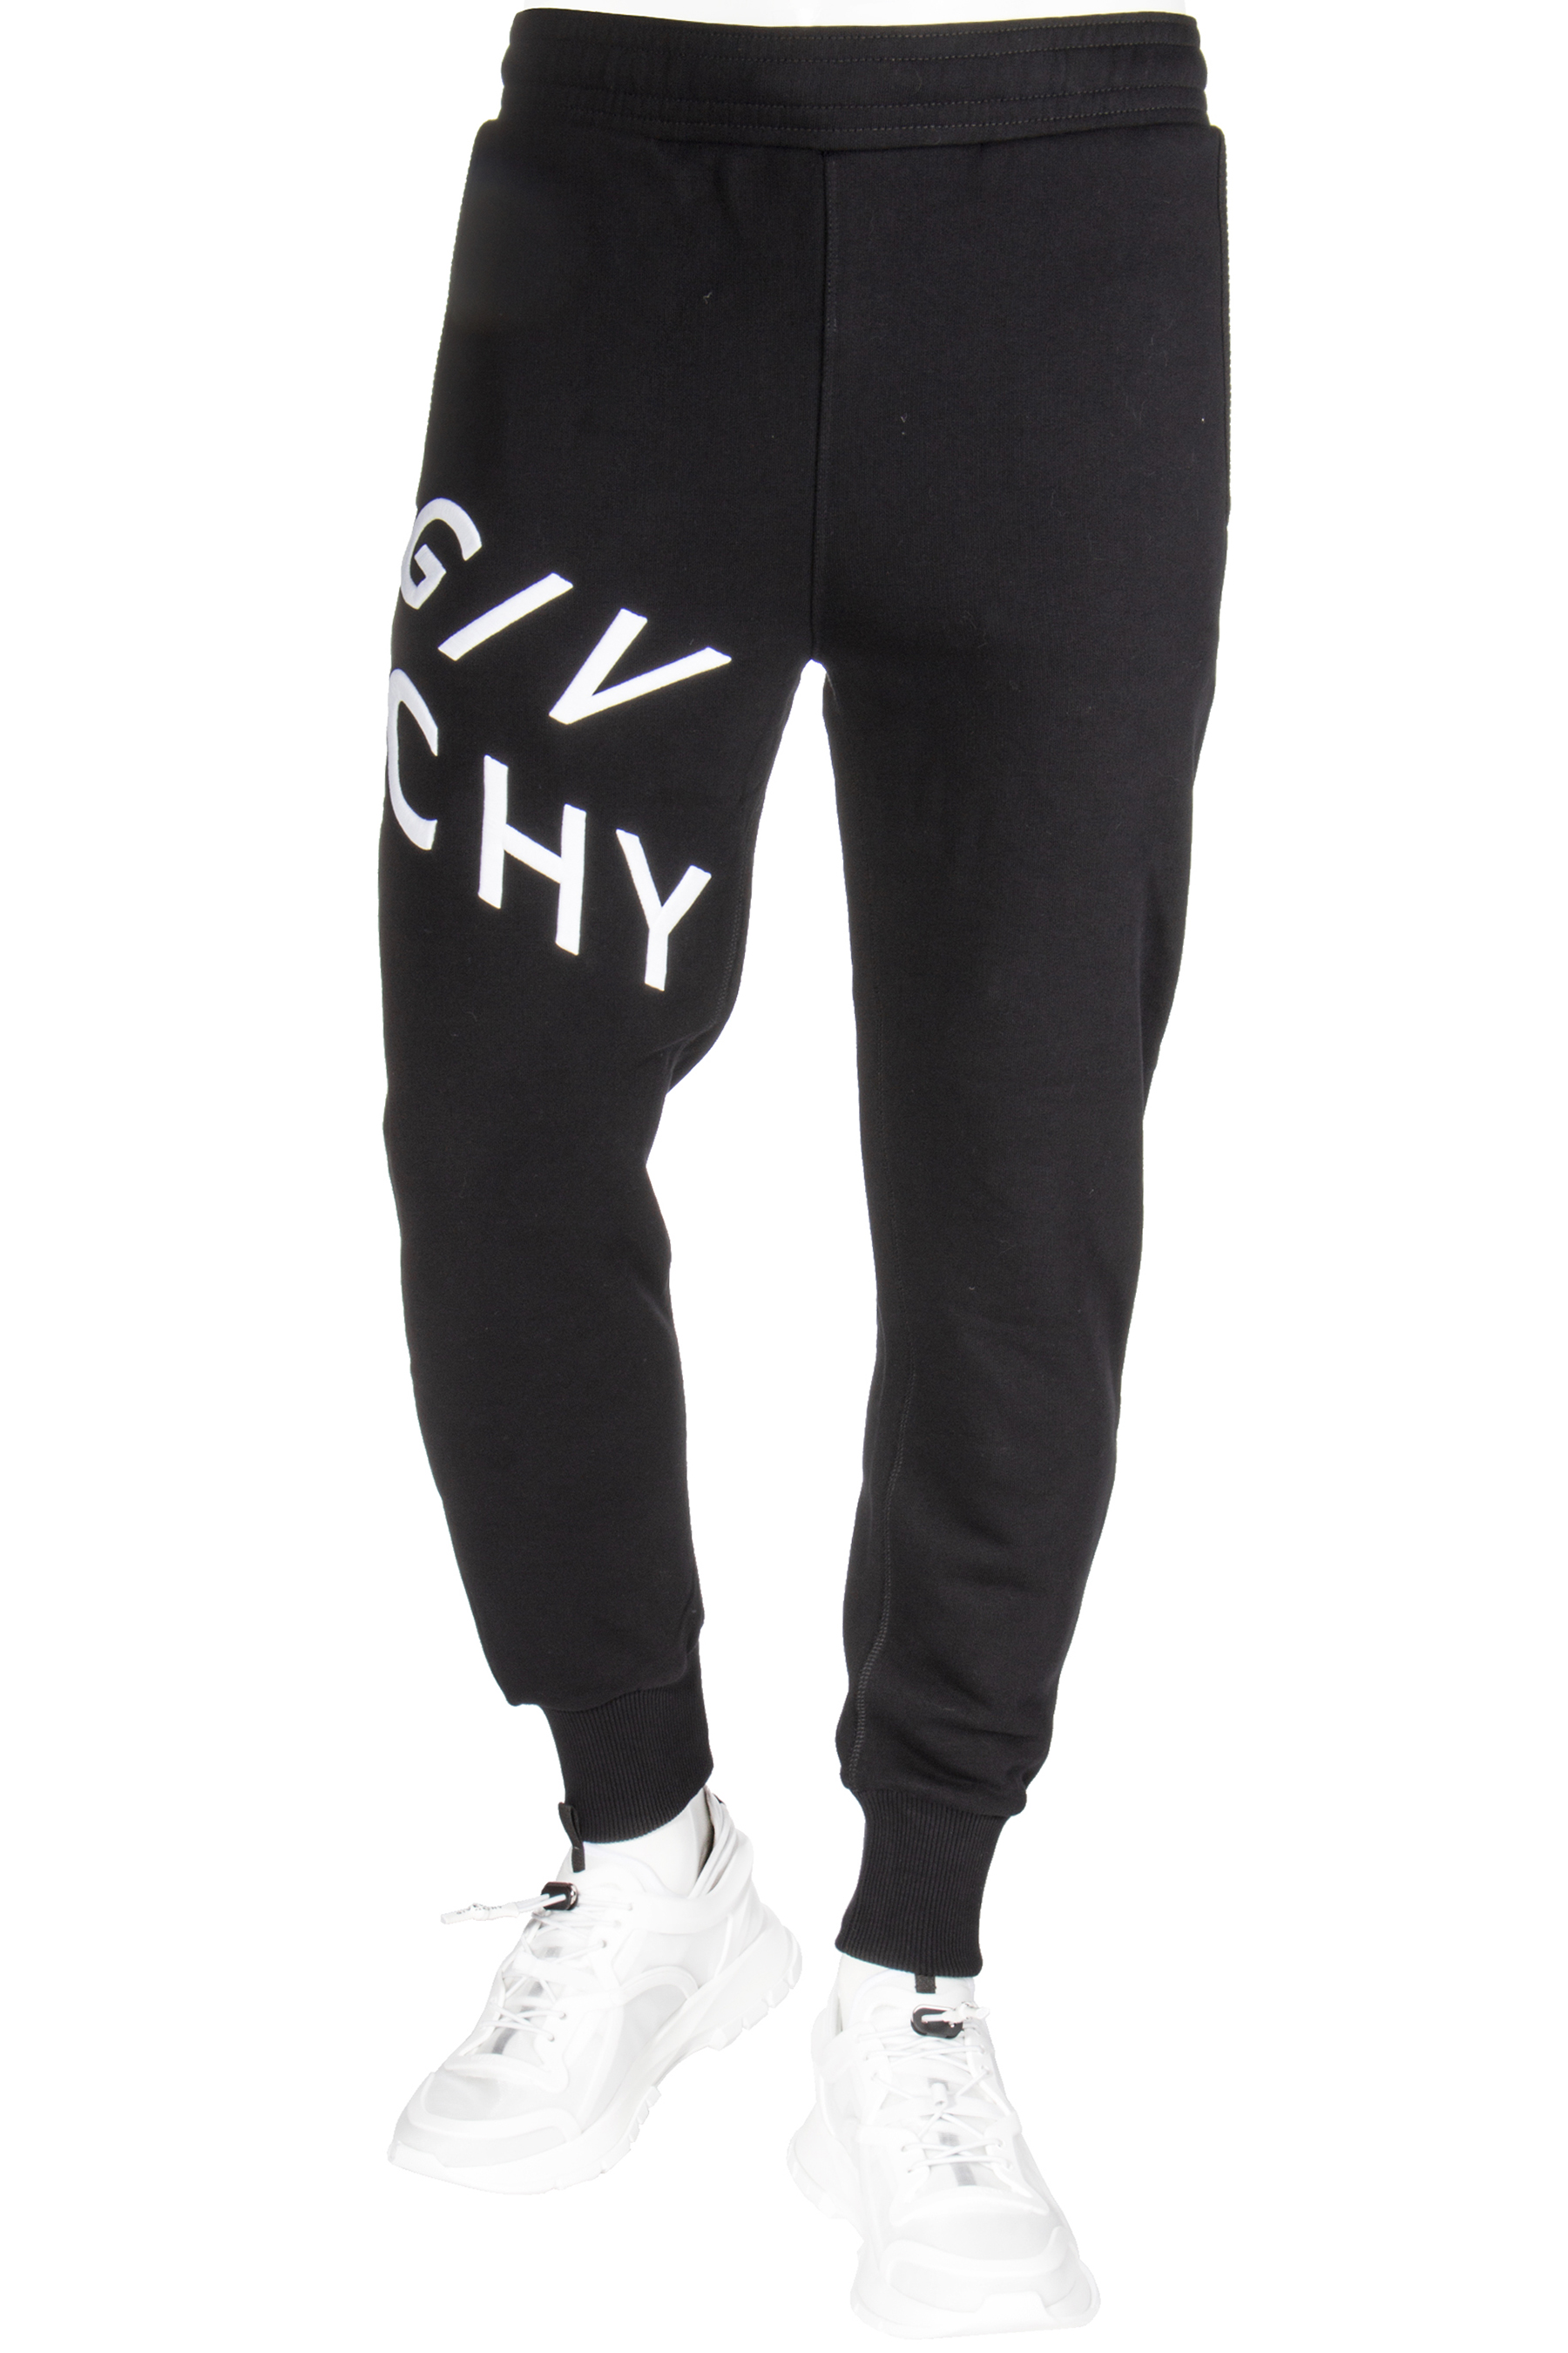 GIVENCHY Embroidered Logo Sweatpants | Sweatpants | Jeans & Pants ...